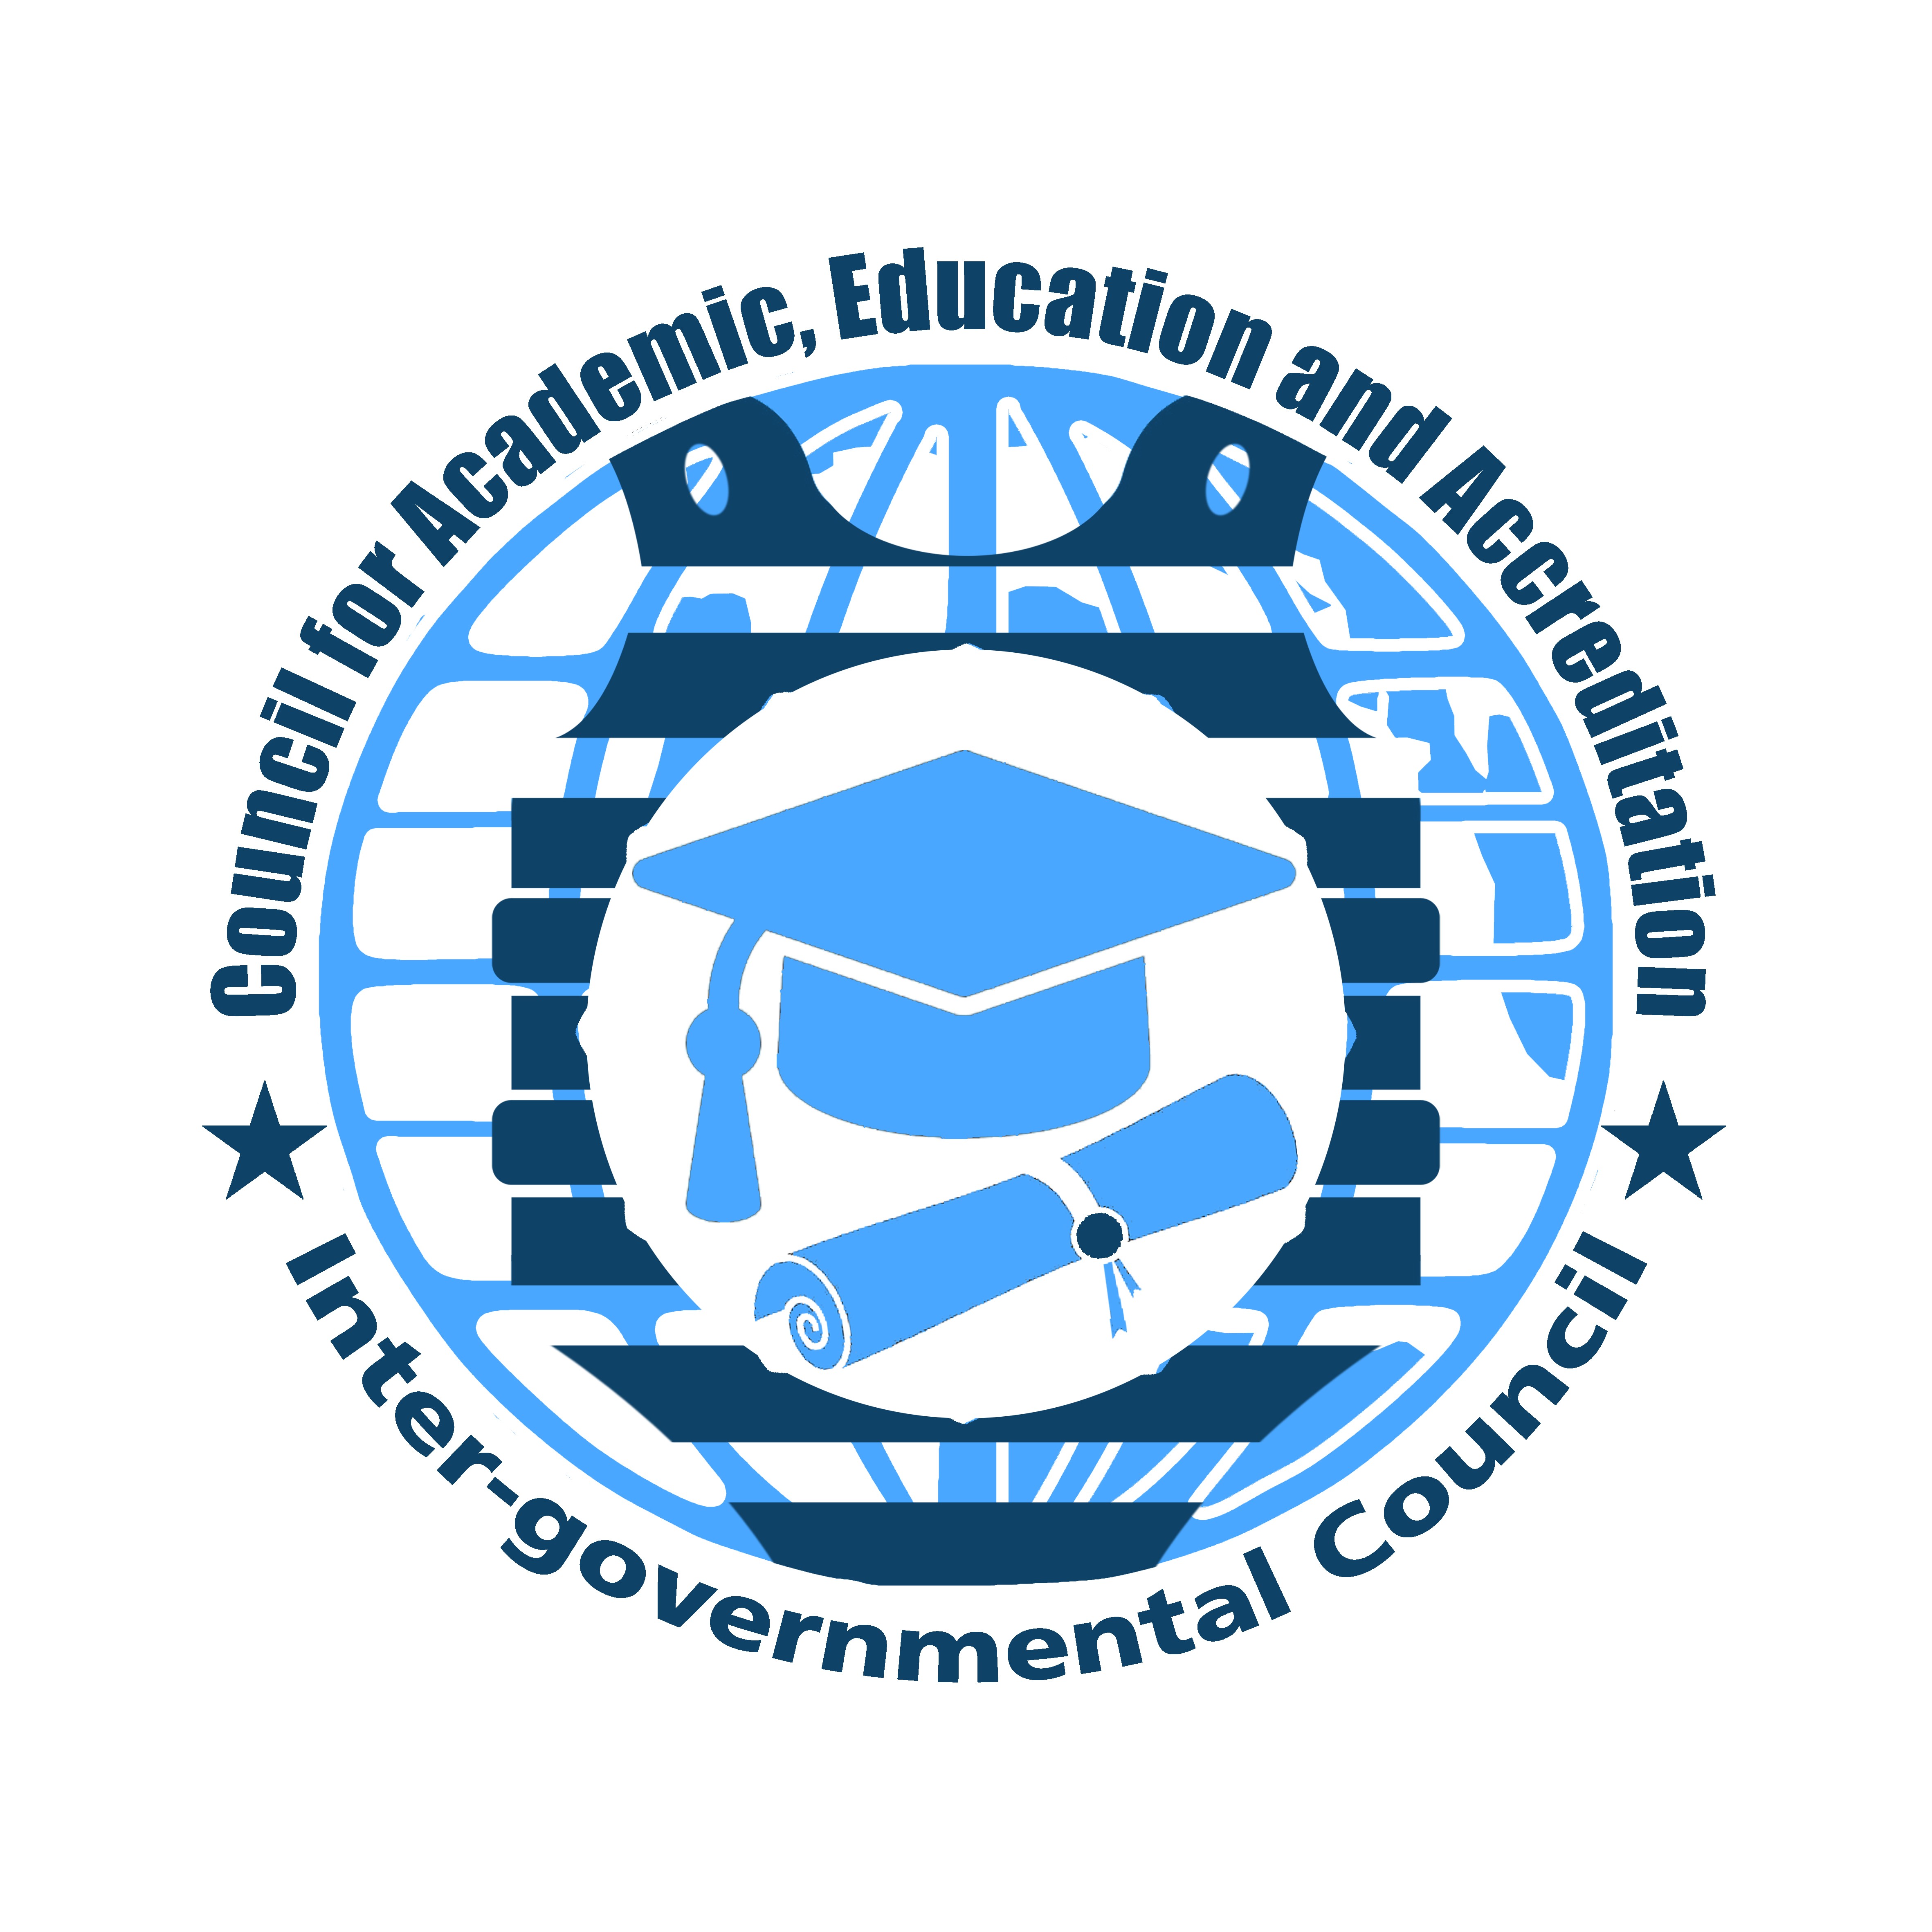 Council of Academic, Education and Accreditation